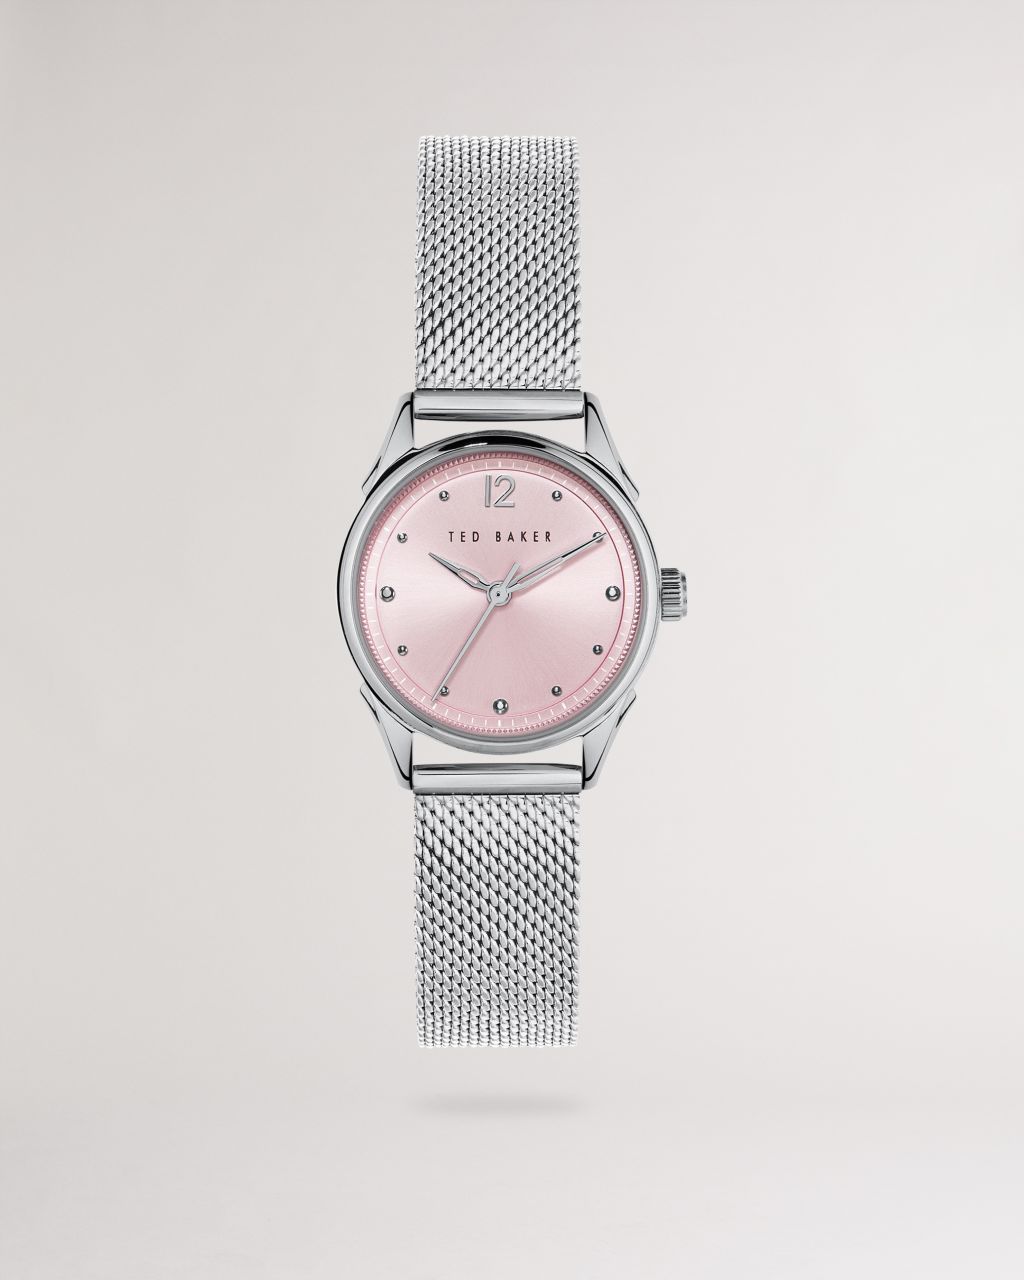 Ted Baker Women's Mesh Strap Watch in Silver Color, Lucyii